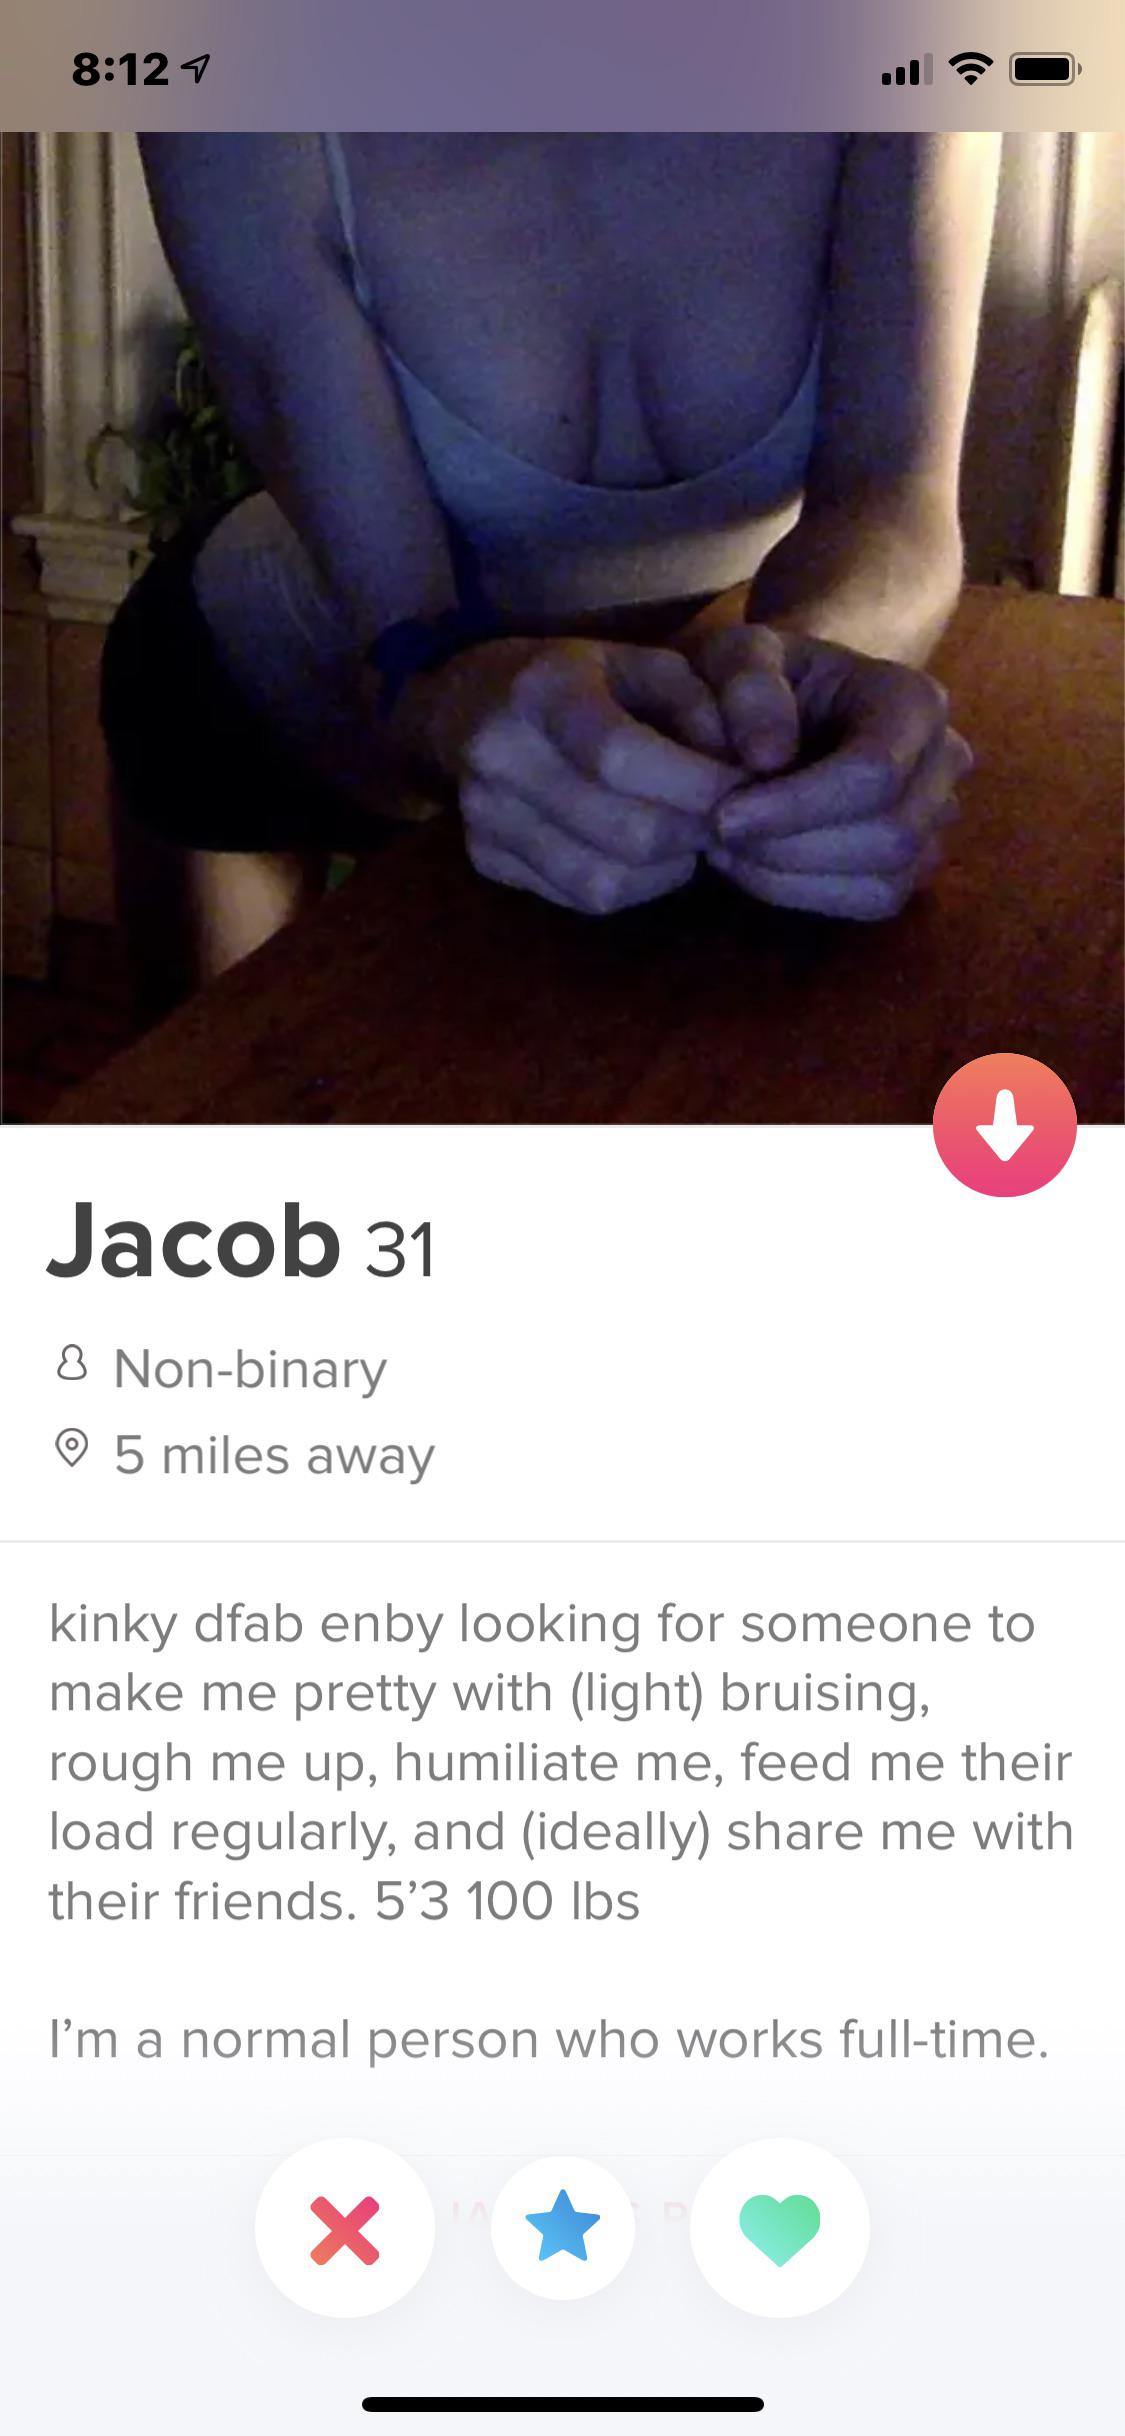 tinder wins and fails -Jacob 31 8 Nonbinary  kinky dfab enby looking for someone to make me pretty with light bruising, rough me up, humiliate me, feed me their load regularly, and ideally me with their friends. 5'3 100 lbs I'm a normal person who works f